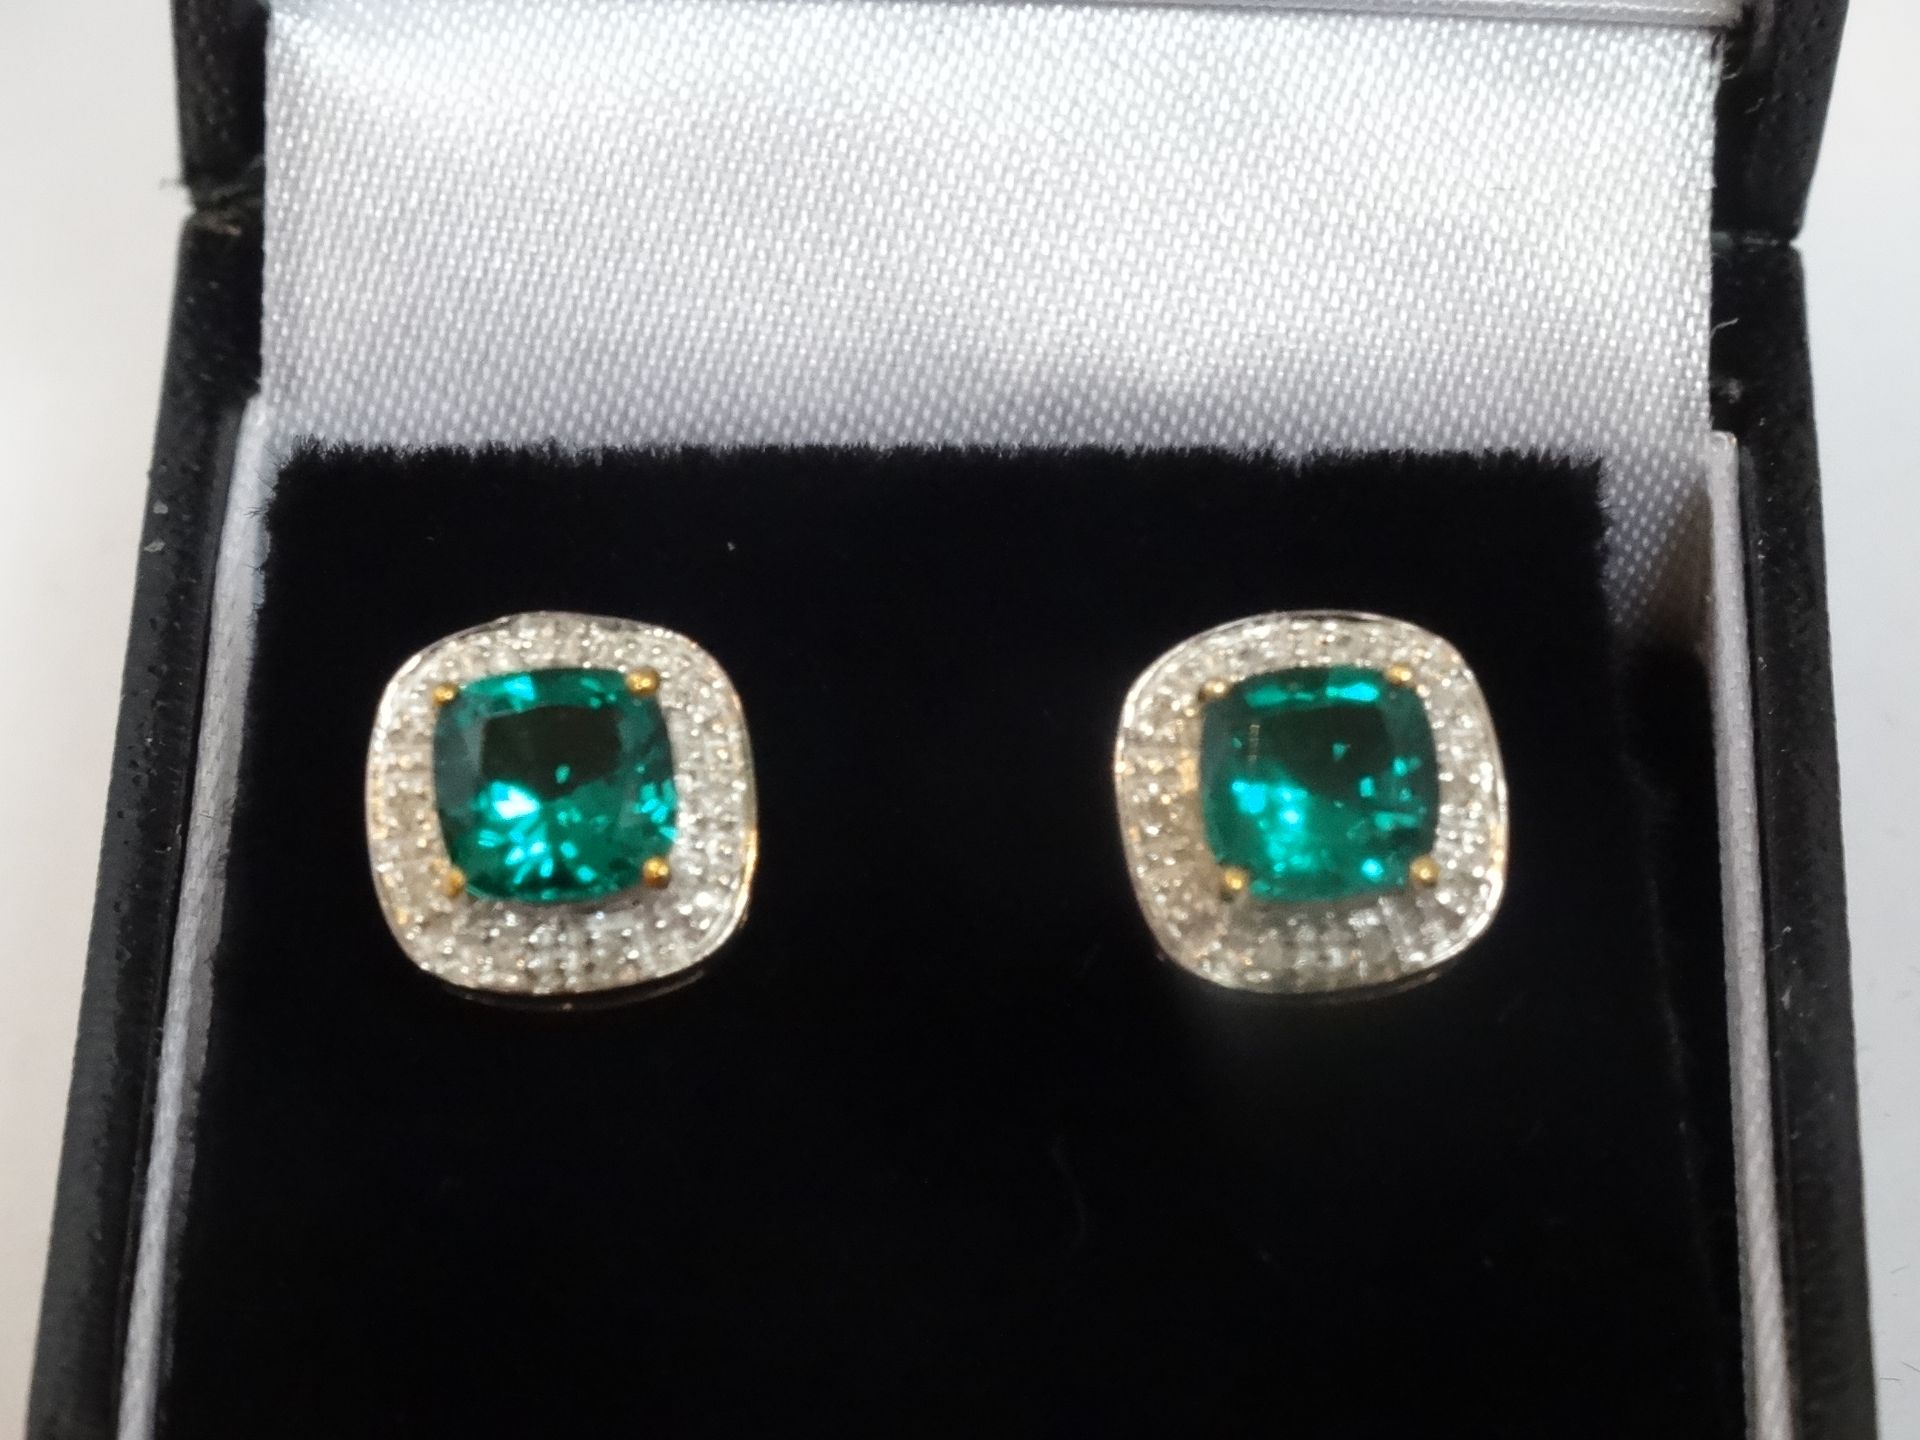 9 Carat Yellow & White Gold Pair of Diamond & 'Emerald Looking' Stone Earrings. - Image 2 of 2